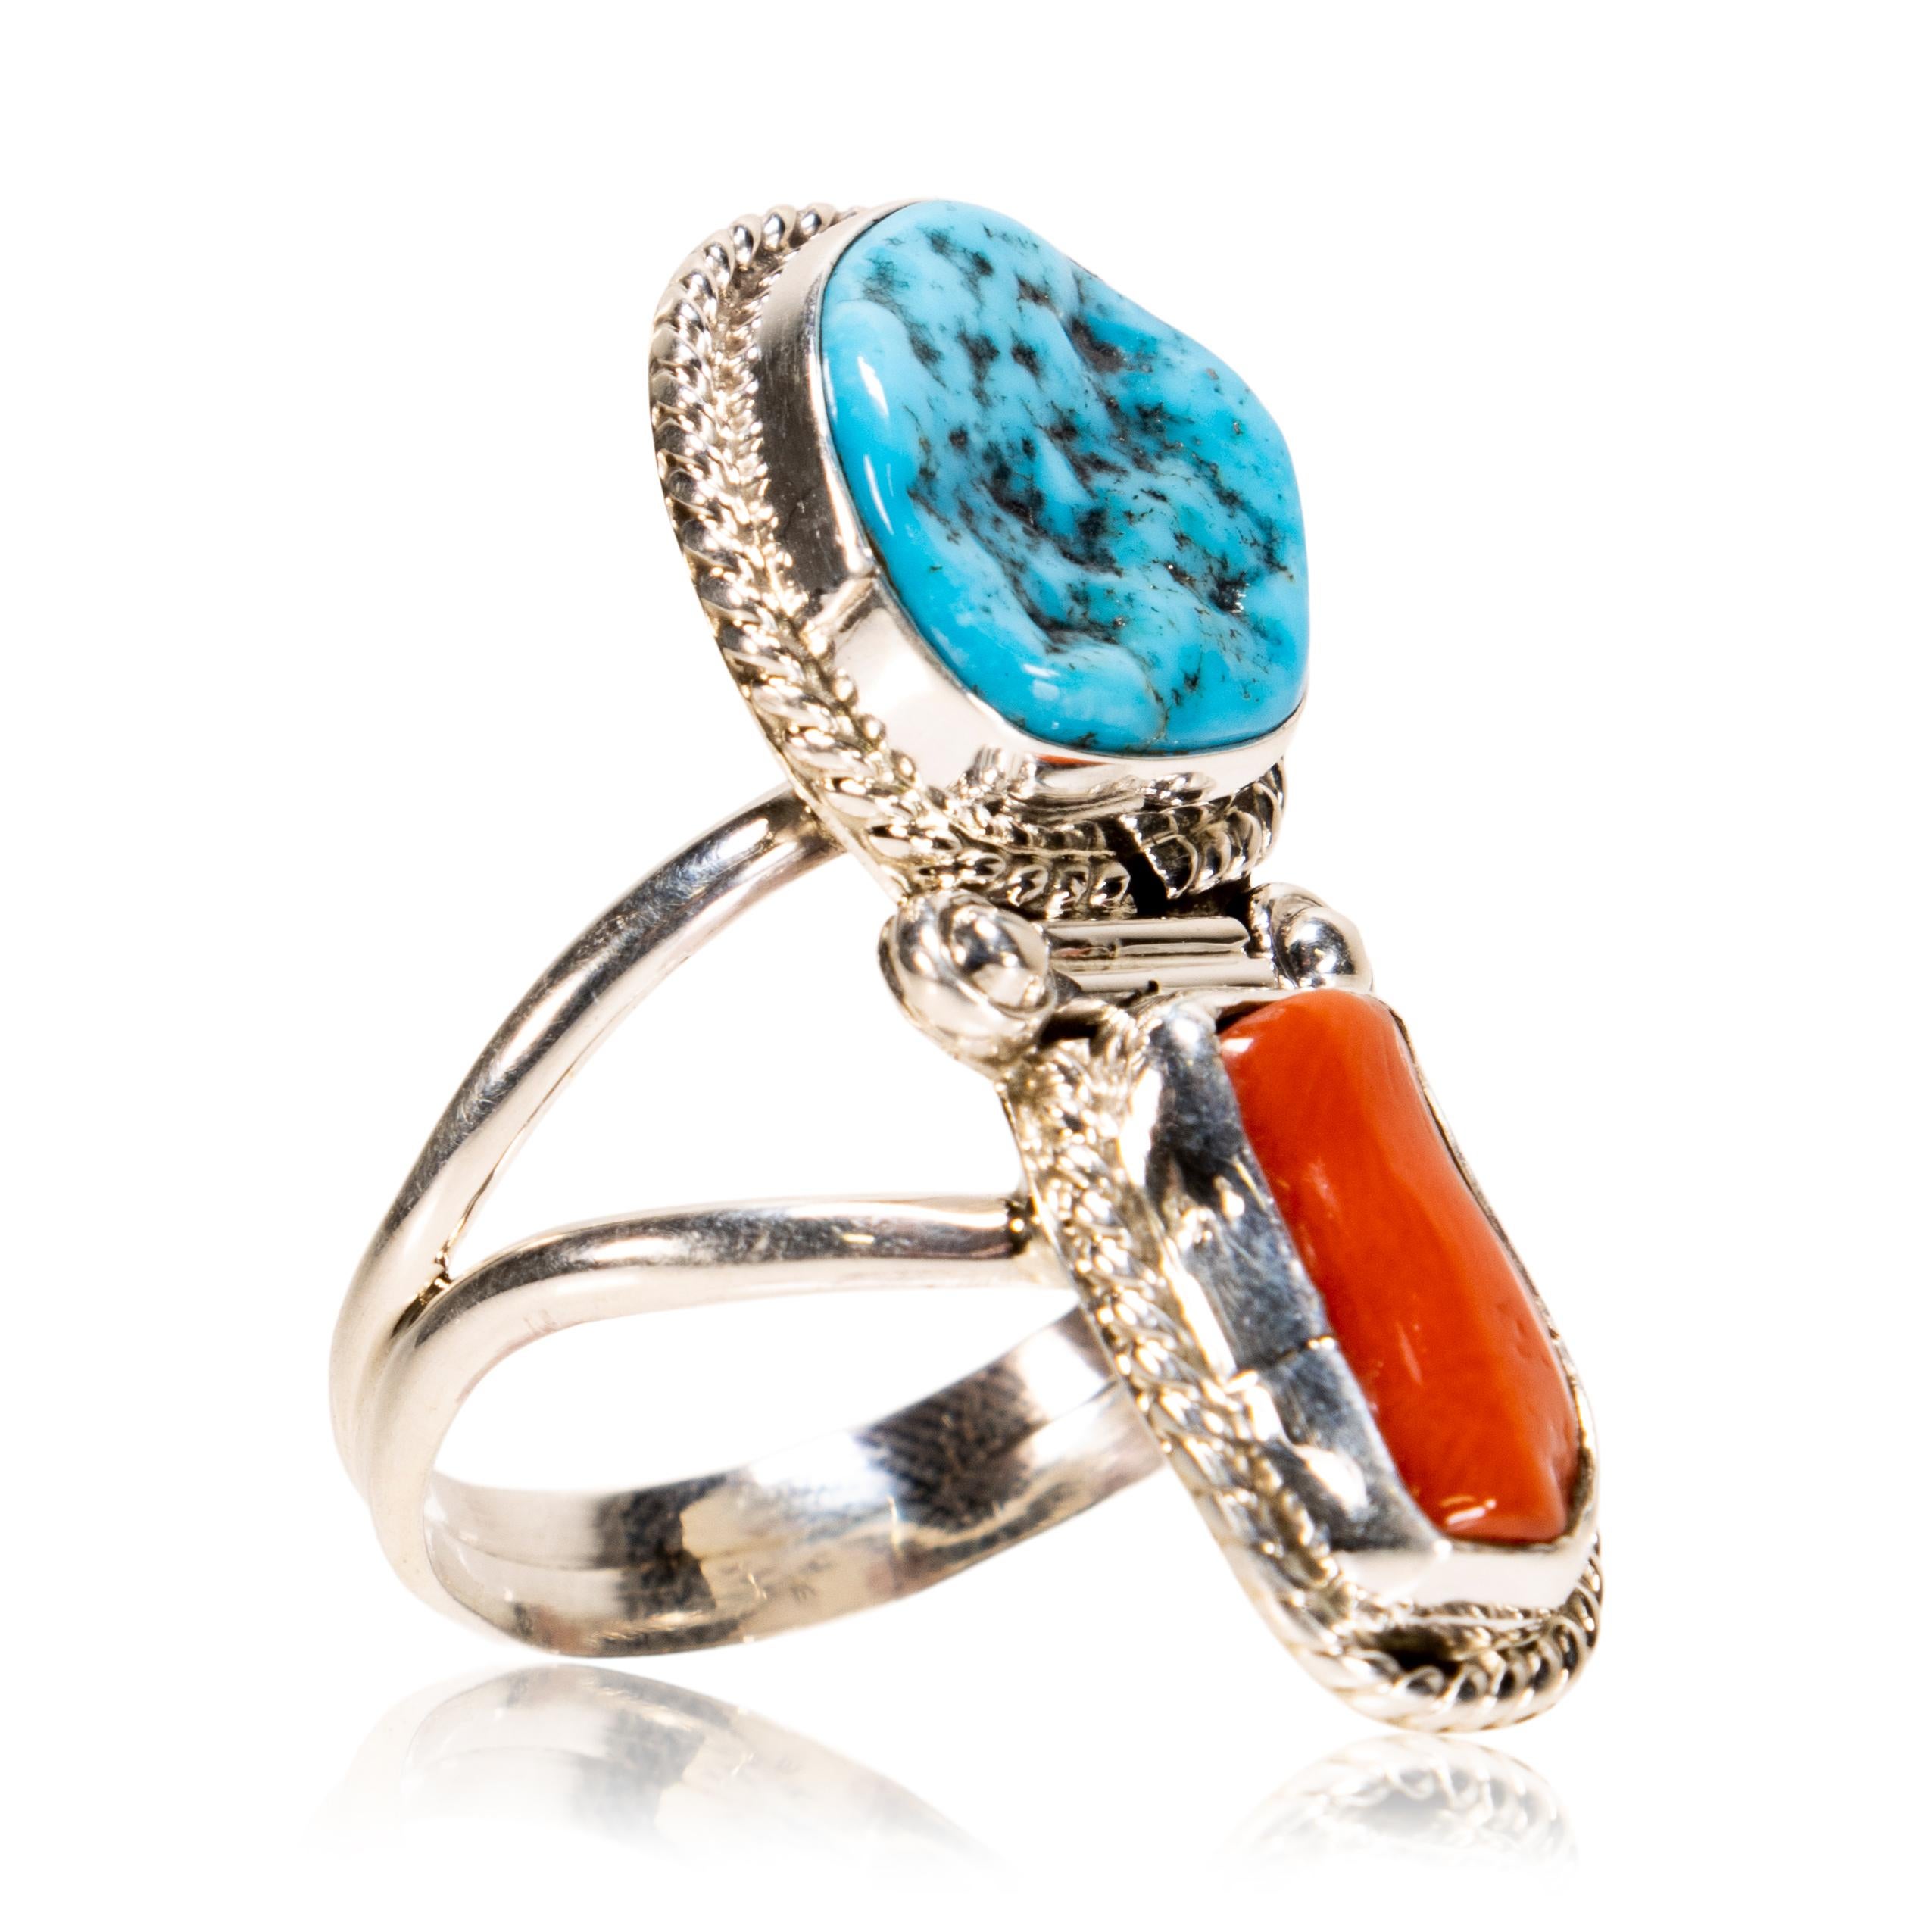 Navajo Kingman turquoise and oxblood coral and sterling silver ring. Stamped 